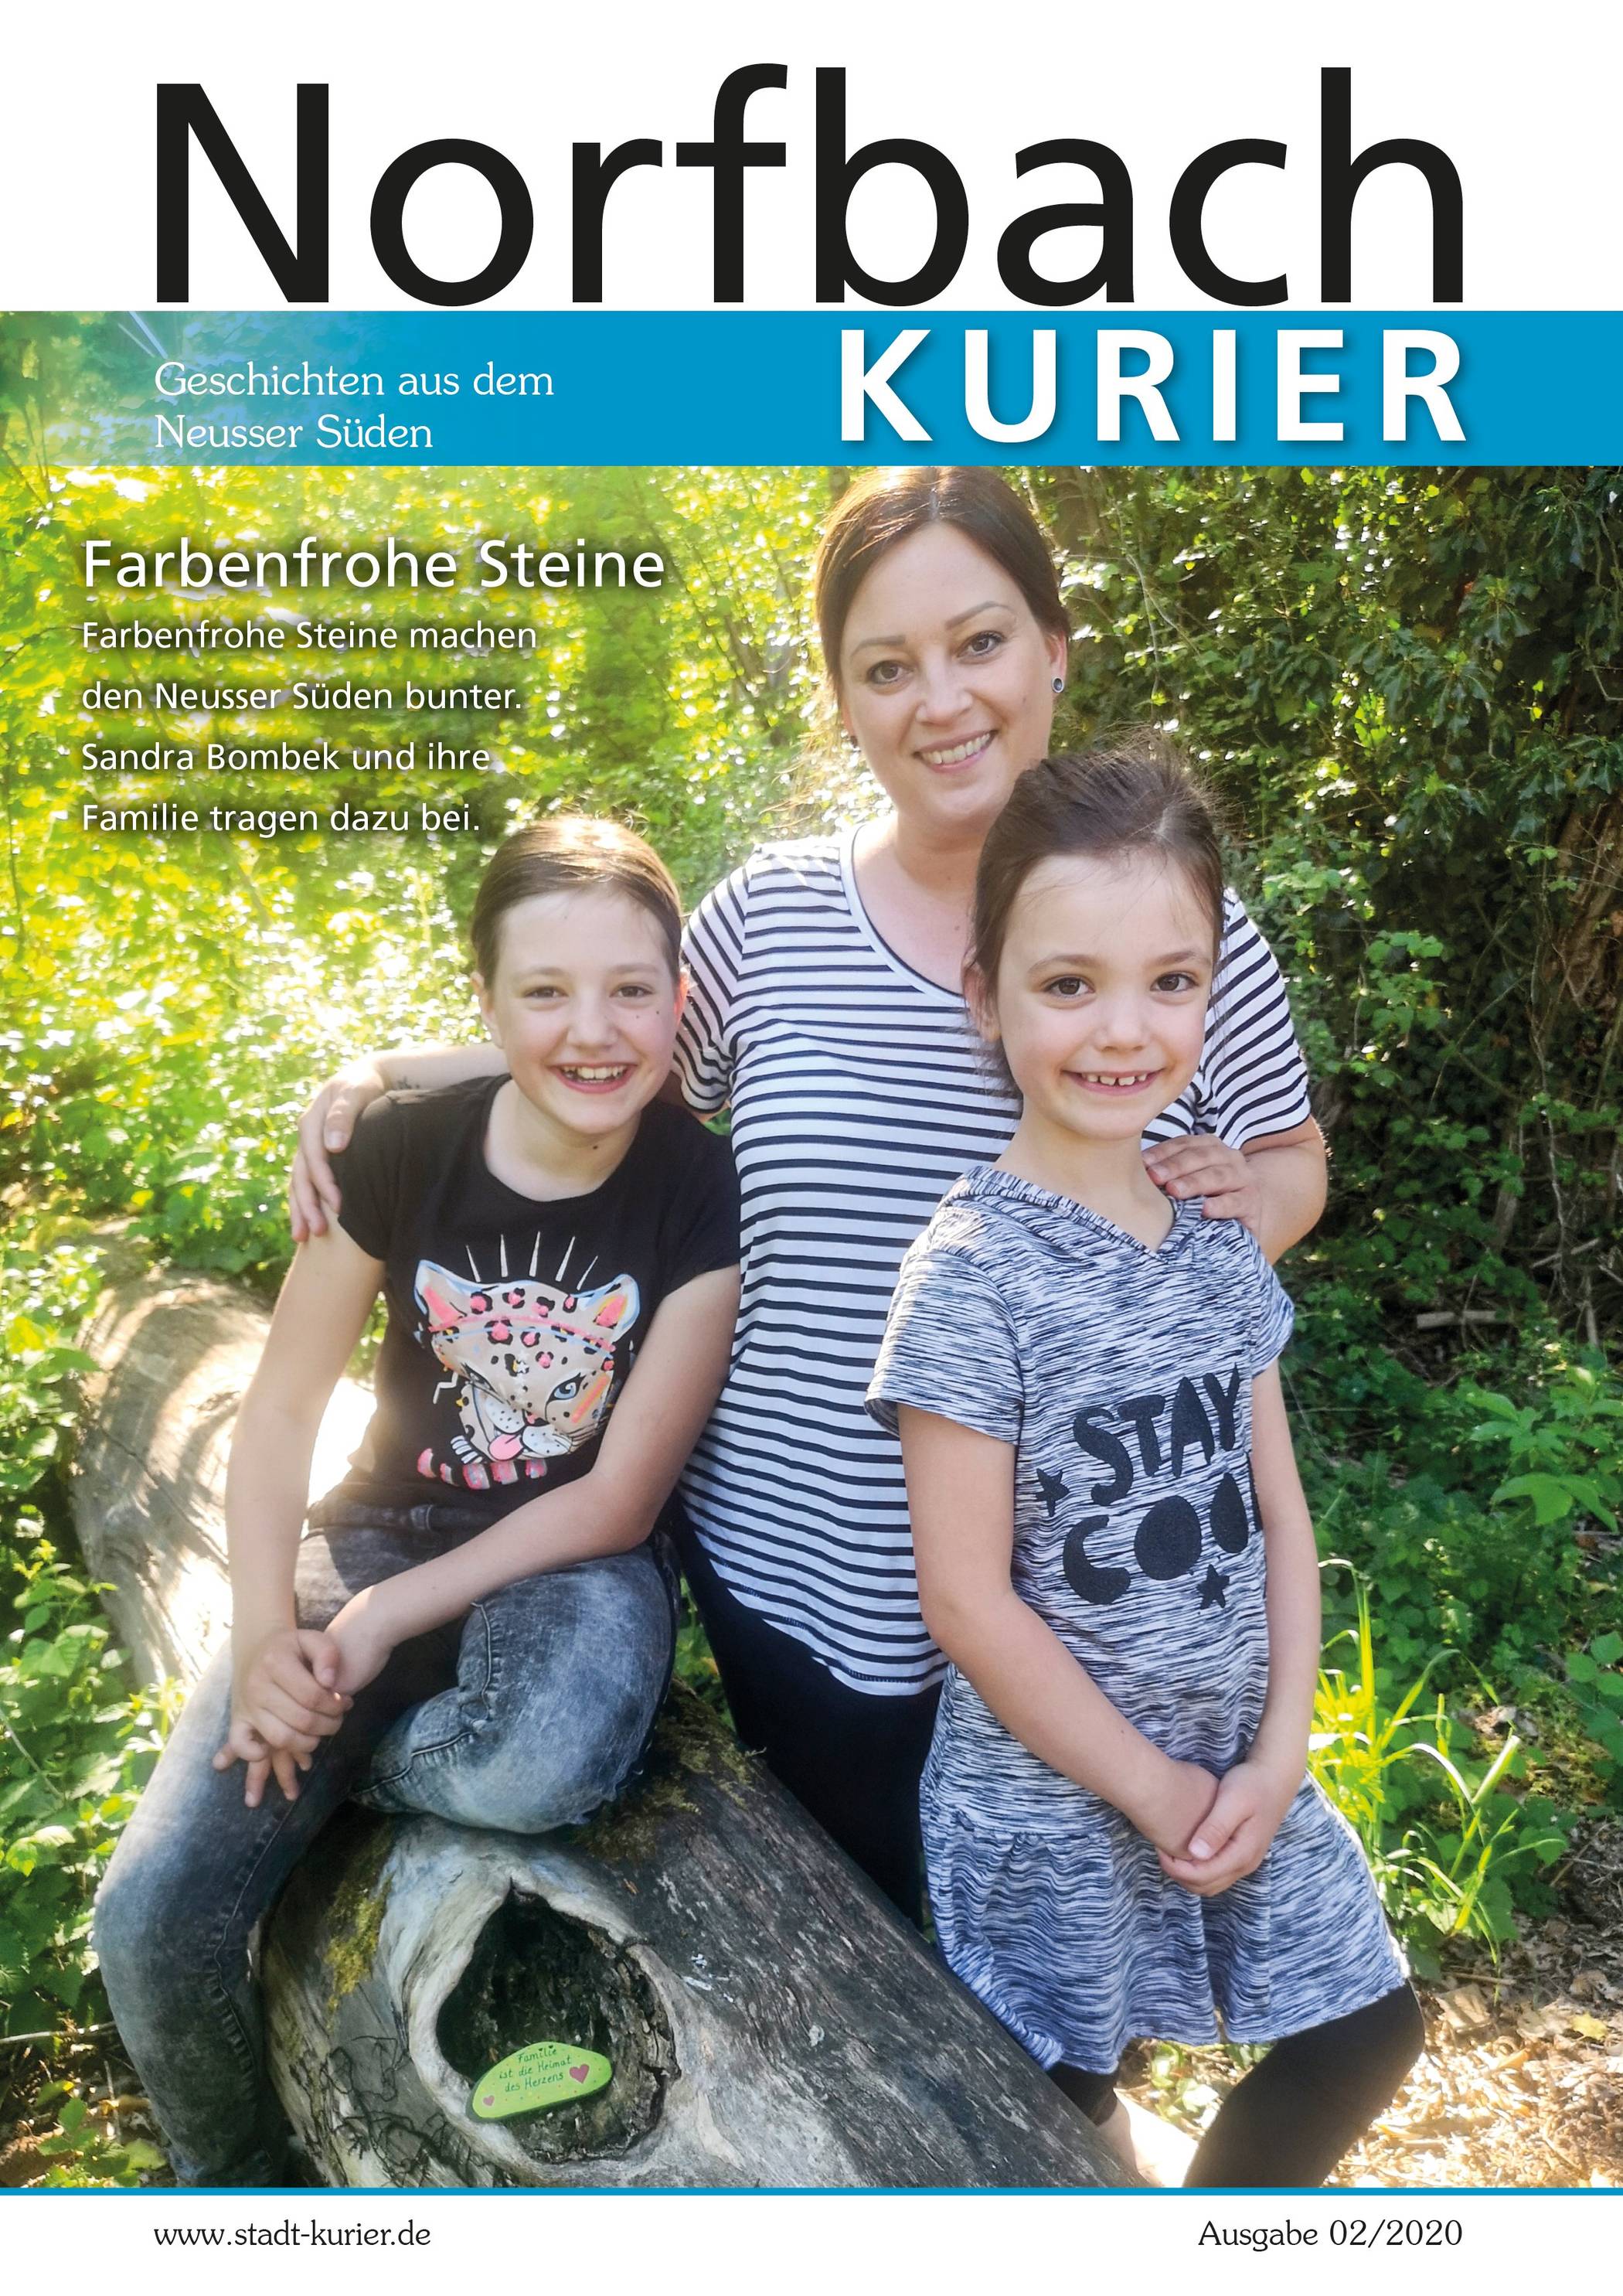 Norfbach-Kurier